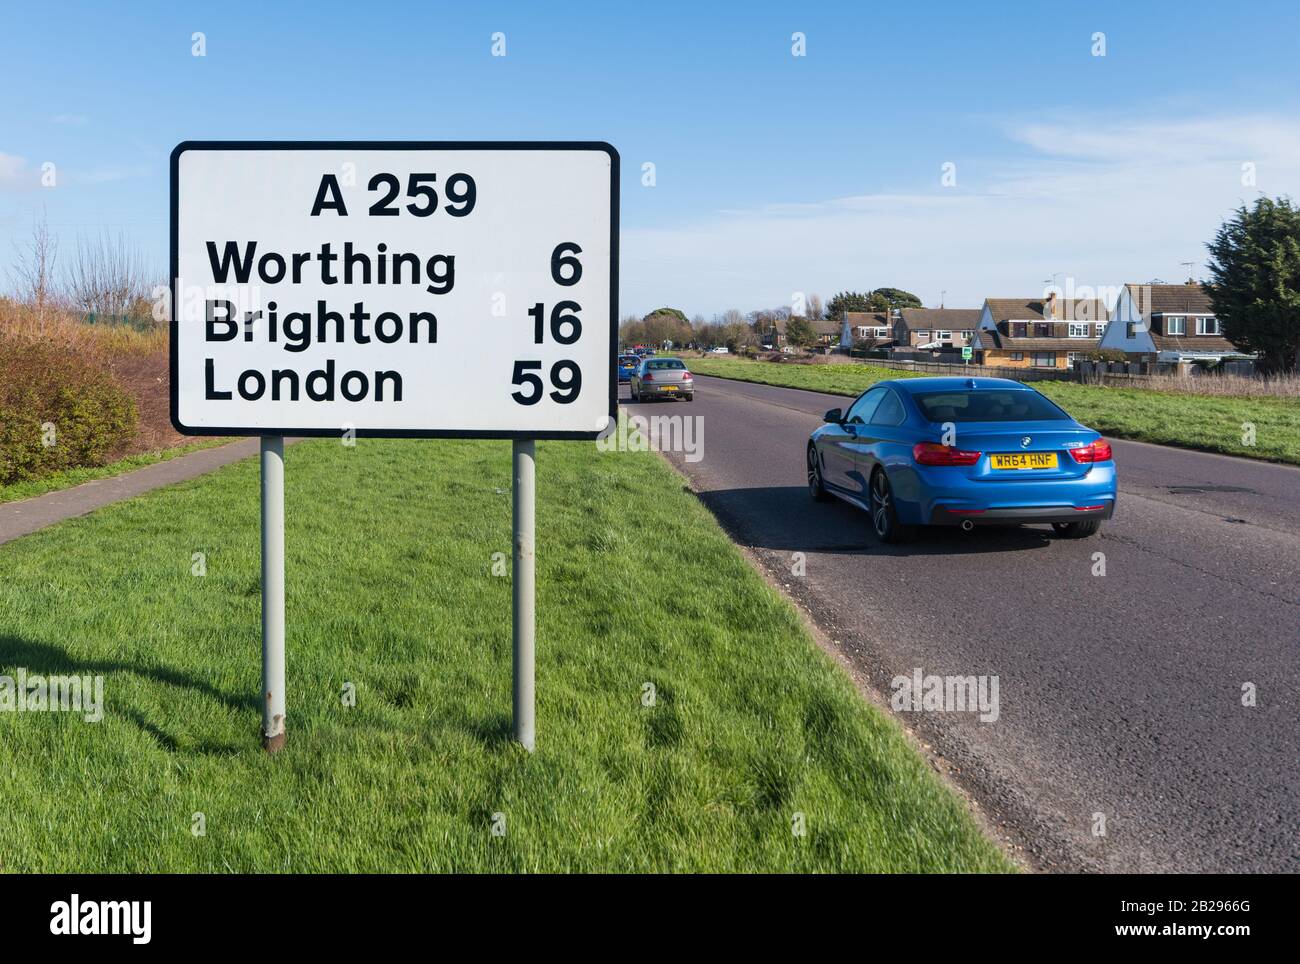 A259 main A road at Roundstone Bypass Road in Angmering, West Sussex, England, UK. Road sign to London. Roundstone by-pass road. Stock Photo